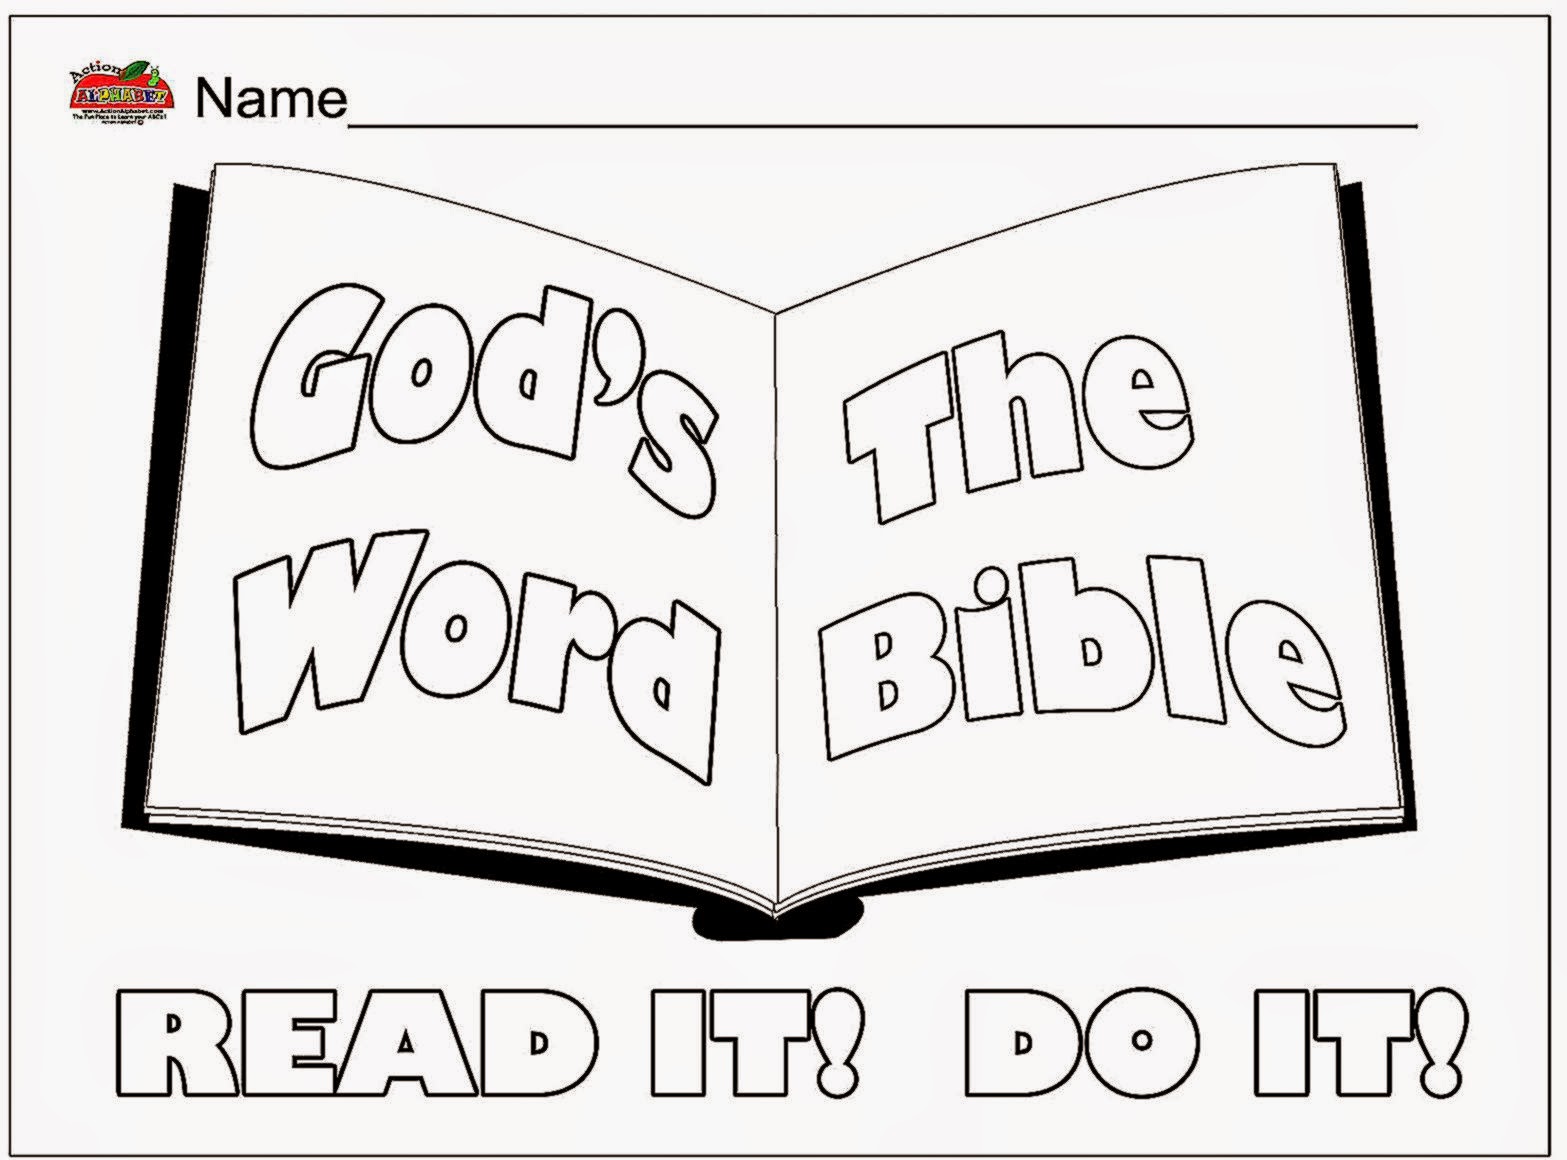 bible-verse-coloring-page-printable-digital-download-bible-coloring-pages-christian-kids